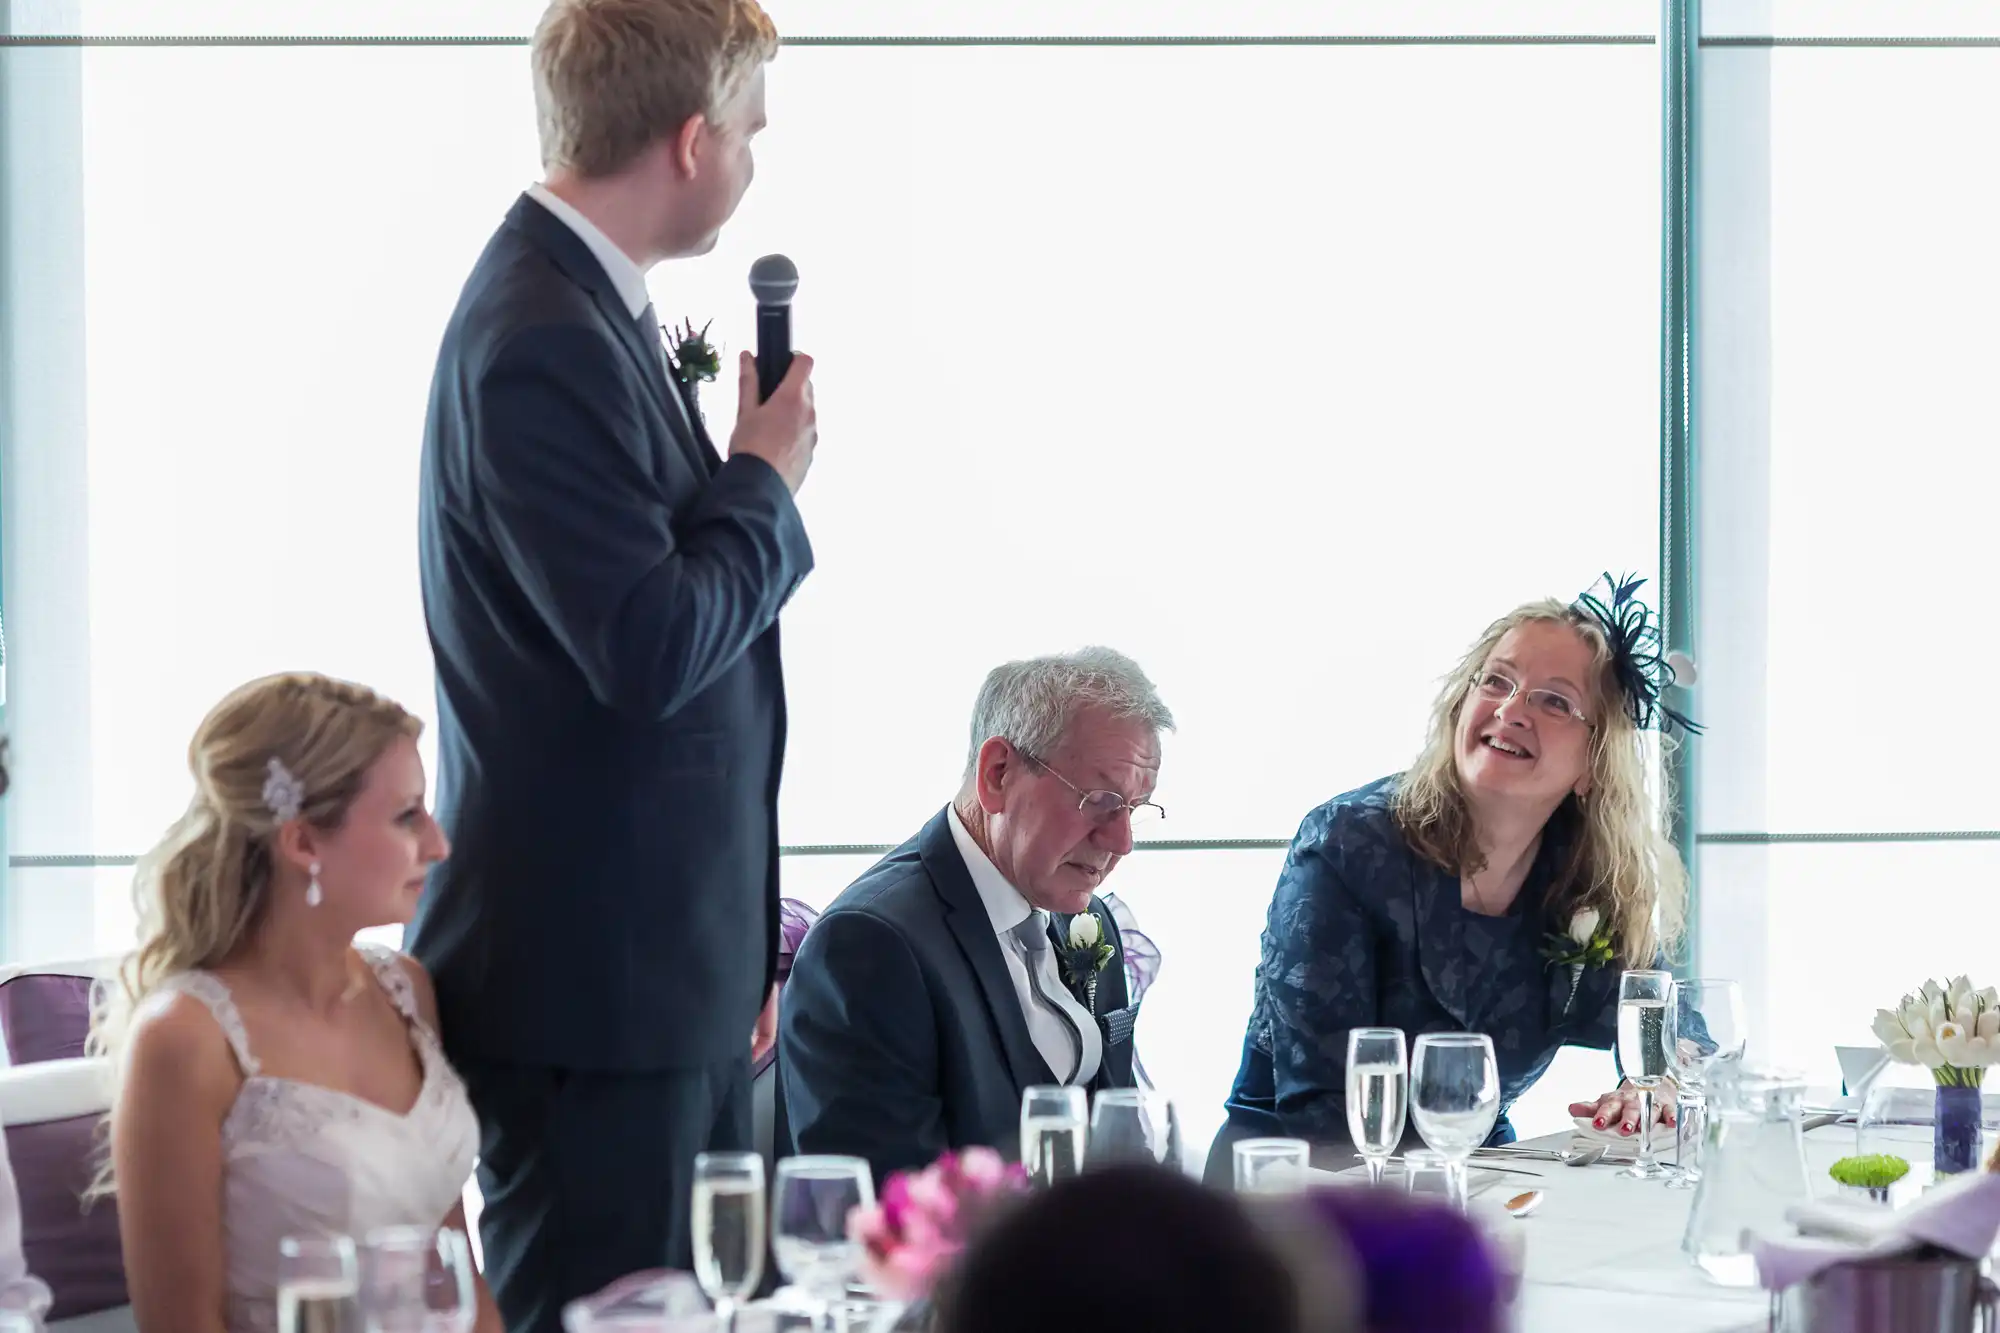 A man standing and speaking into a microphone at a wedding reception, with a laughing couple and a woman listening at a table, in a room with large windows.